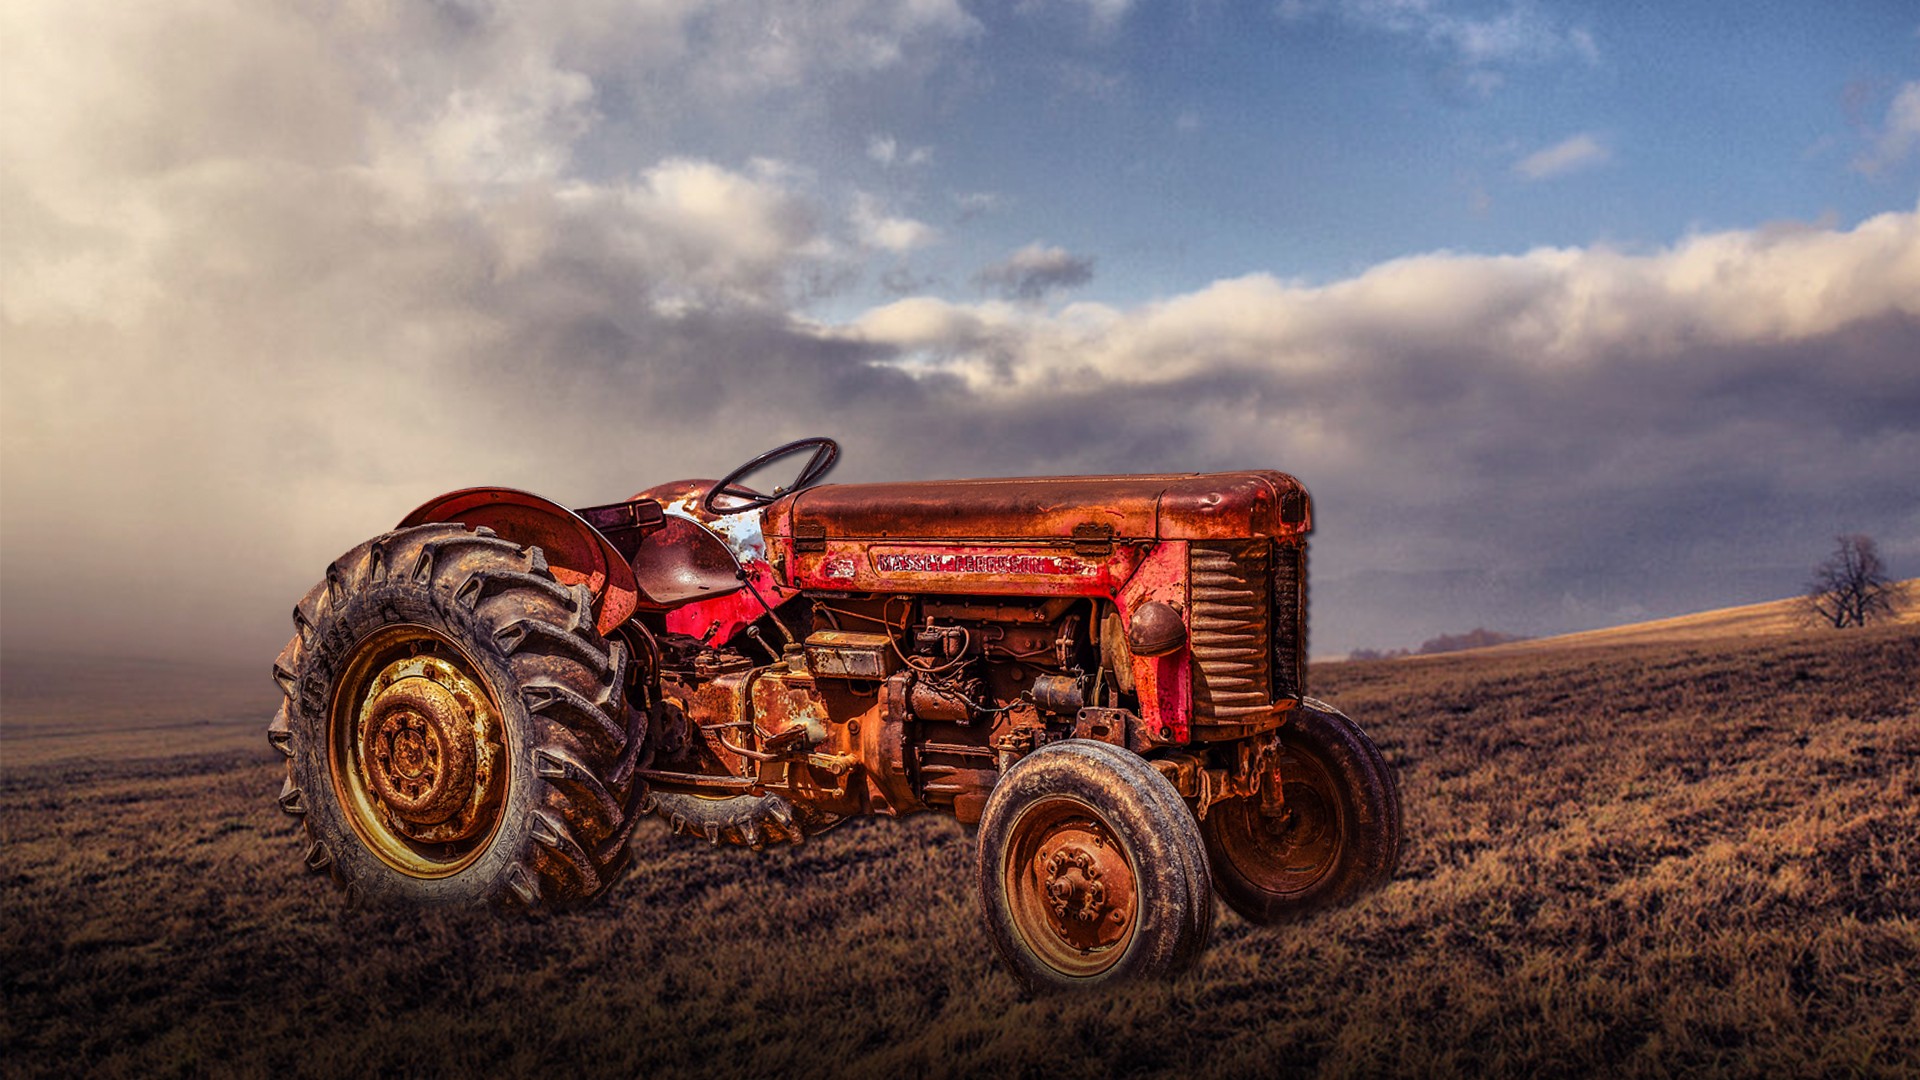 Tractor Wallpaper Posted By Michelle Peltier